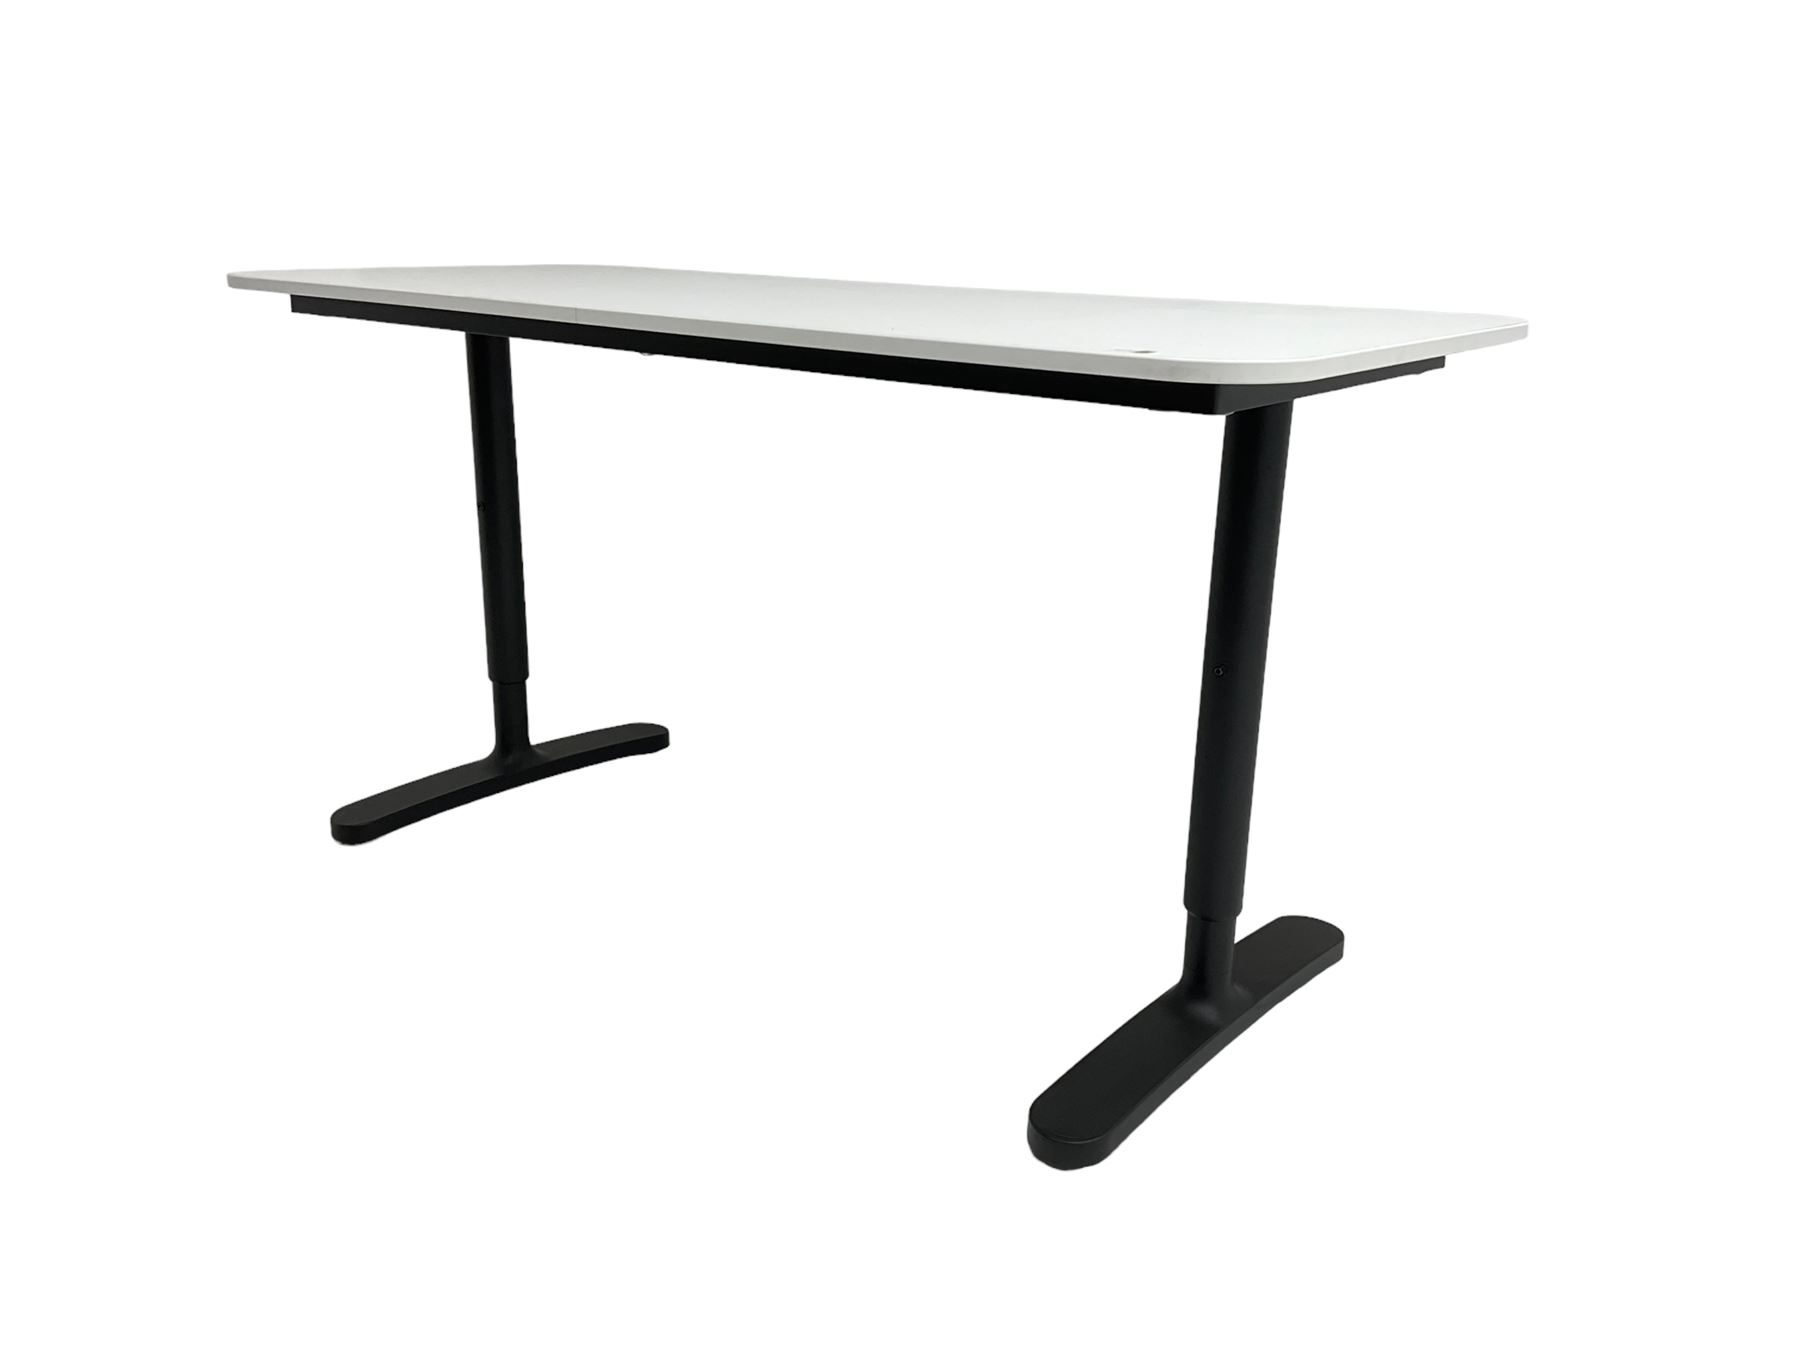 IKEA - contemporary table with white finish top - Image 5 of 6